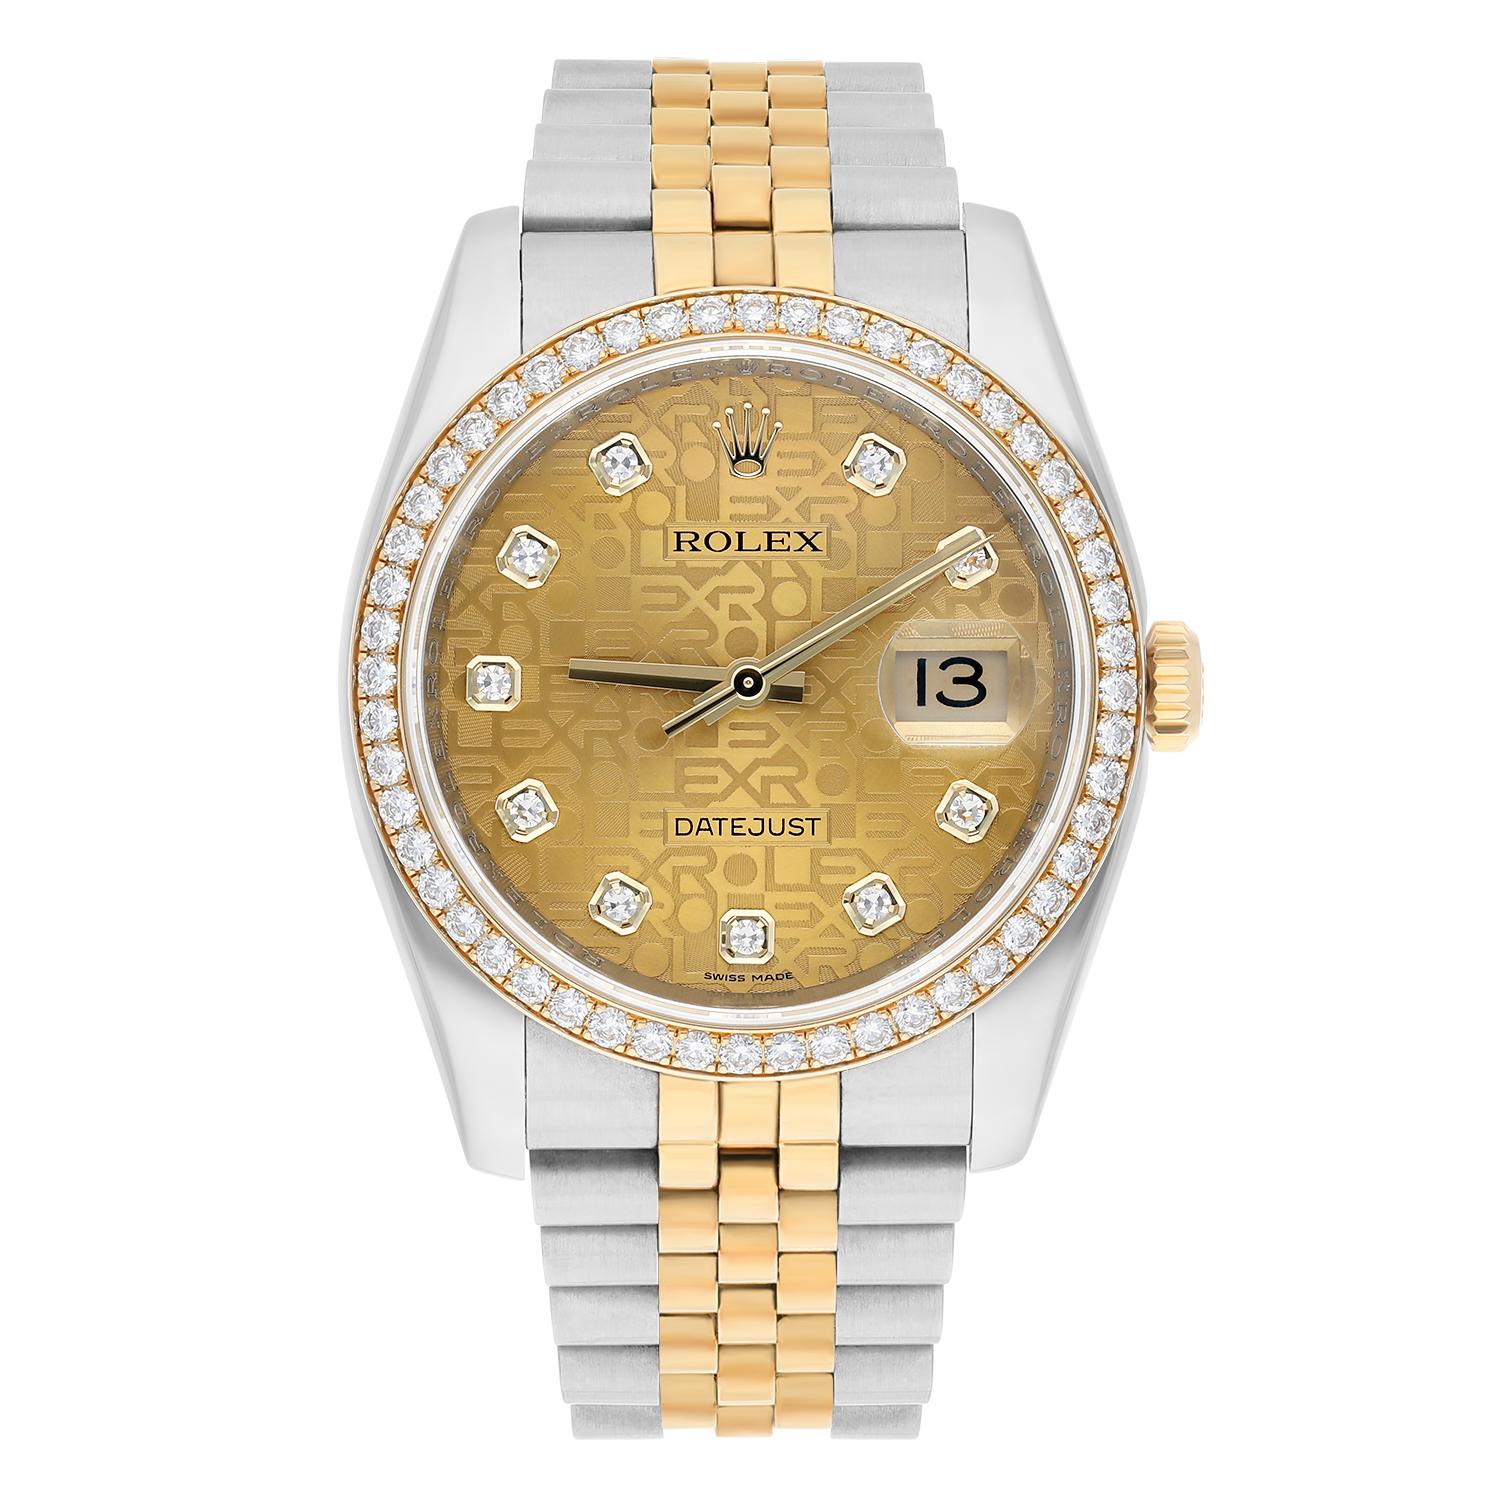 Elevate your style with this exquisite Rolex Datejust wristwatch. Crafted with a stainless steel and yellow gold bracelet, this classic timepiece boasts a factory champagne dial with diamond markers. This luxurious watch features a mechanical